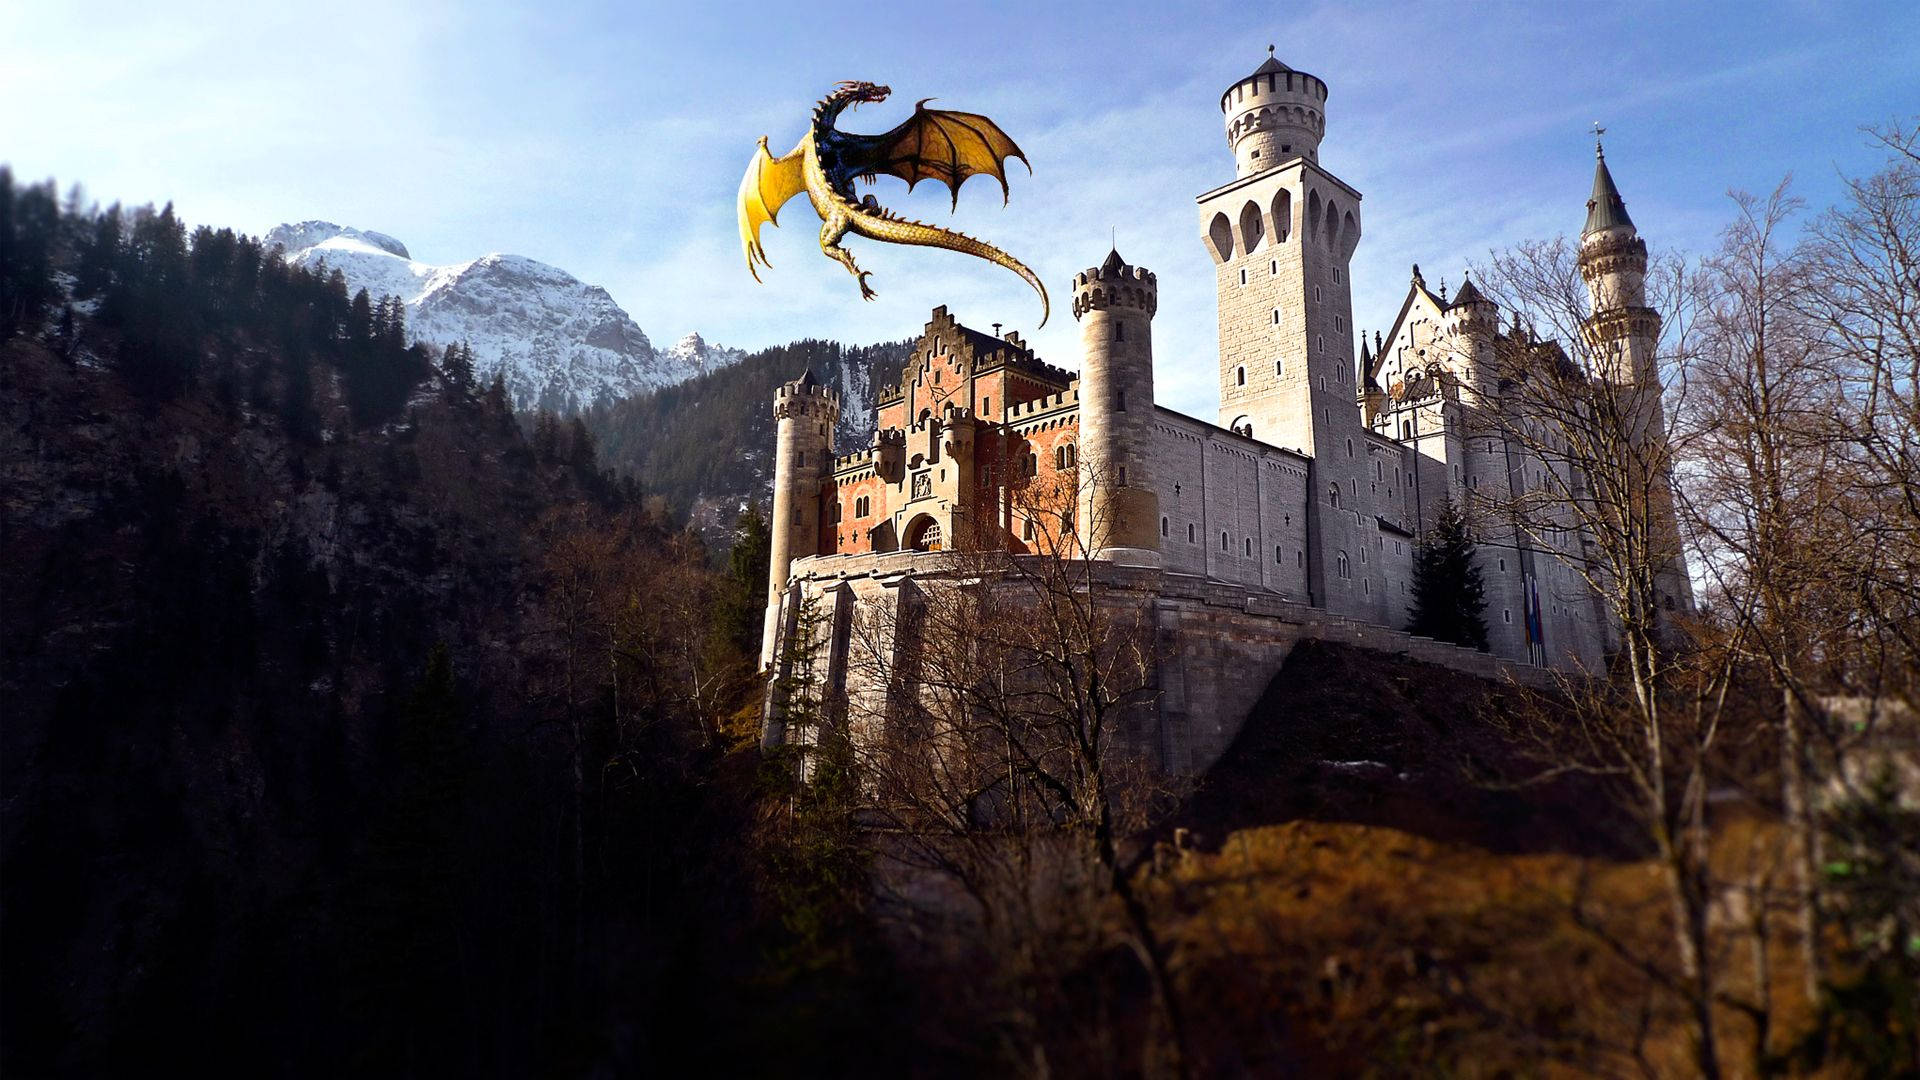 \ Mysterious Castle Surrounded By Majestic Dragon! Wallpaper